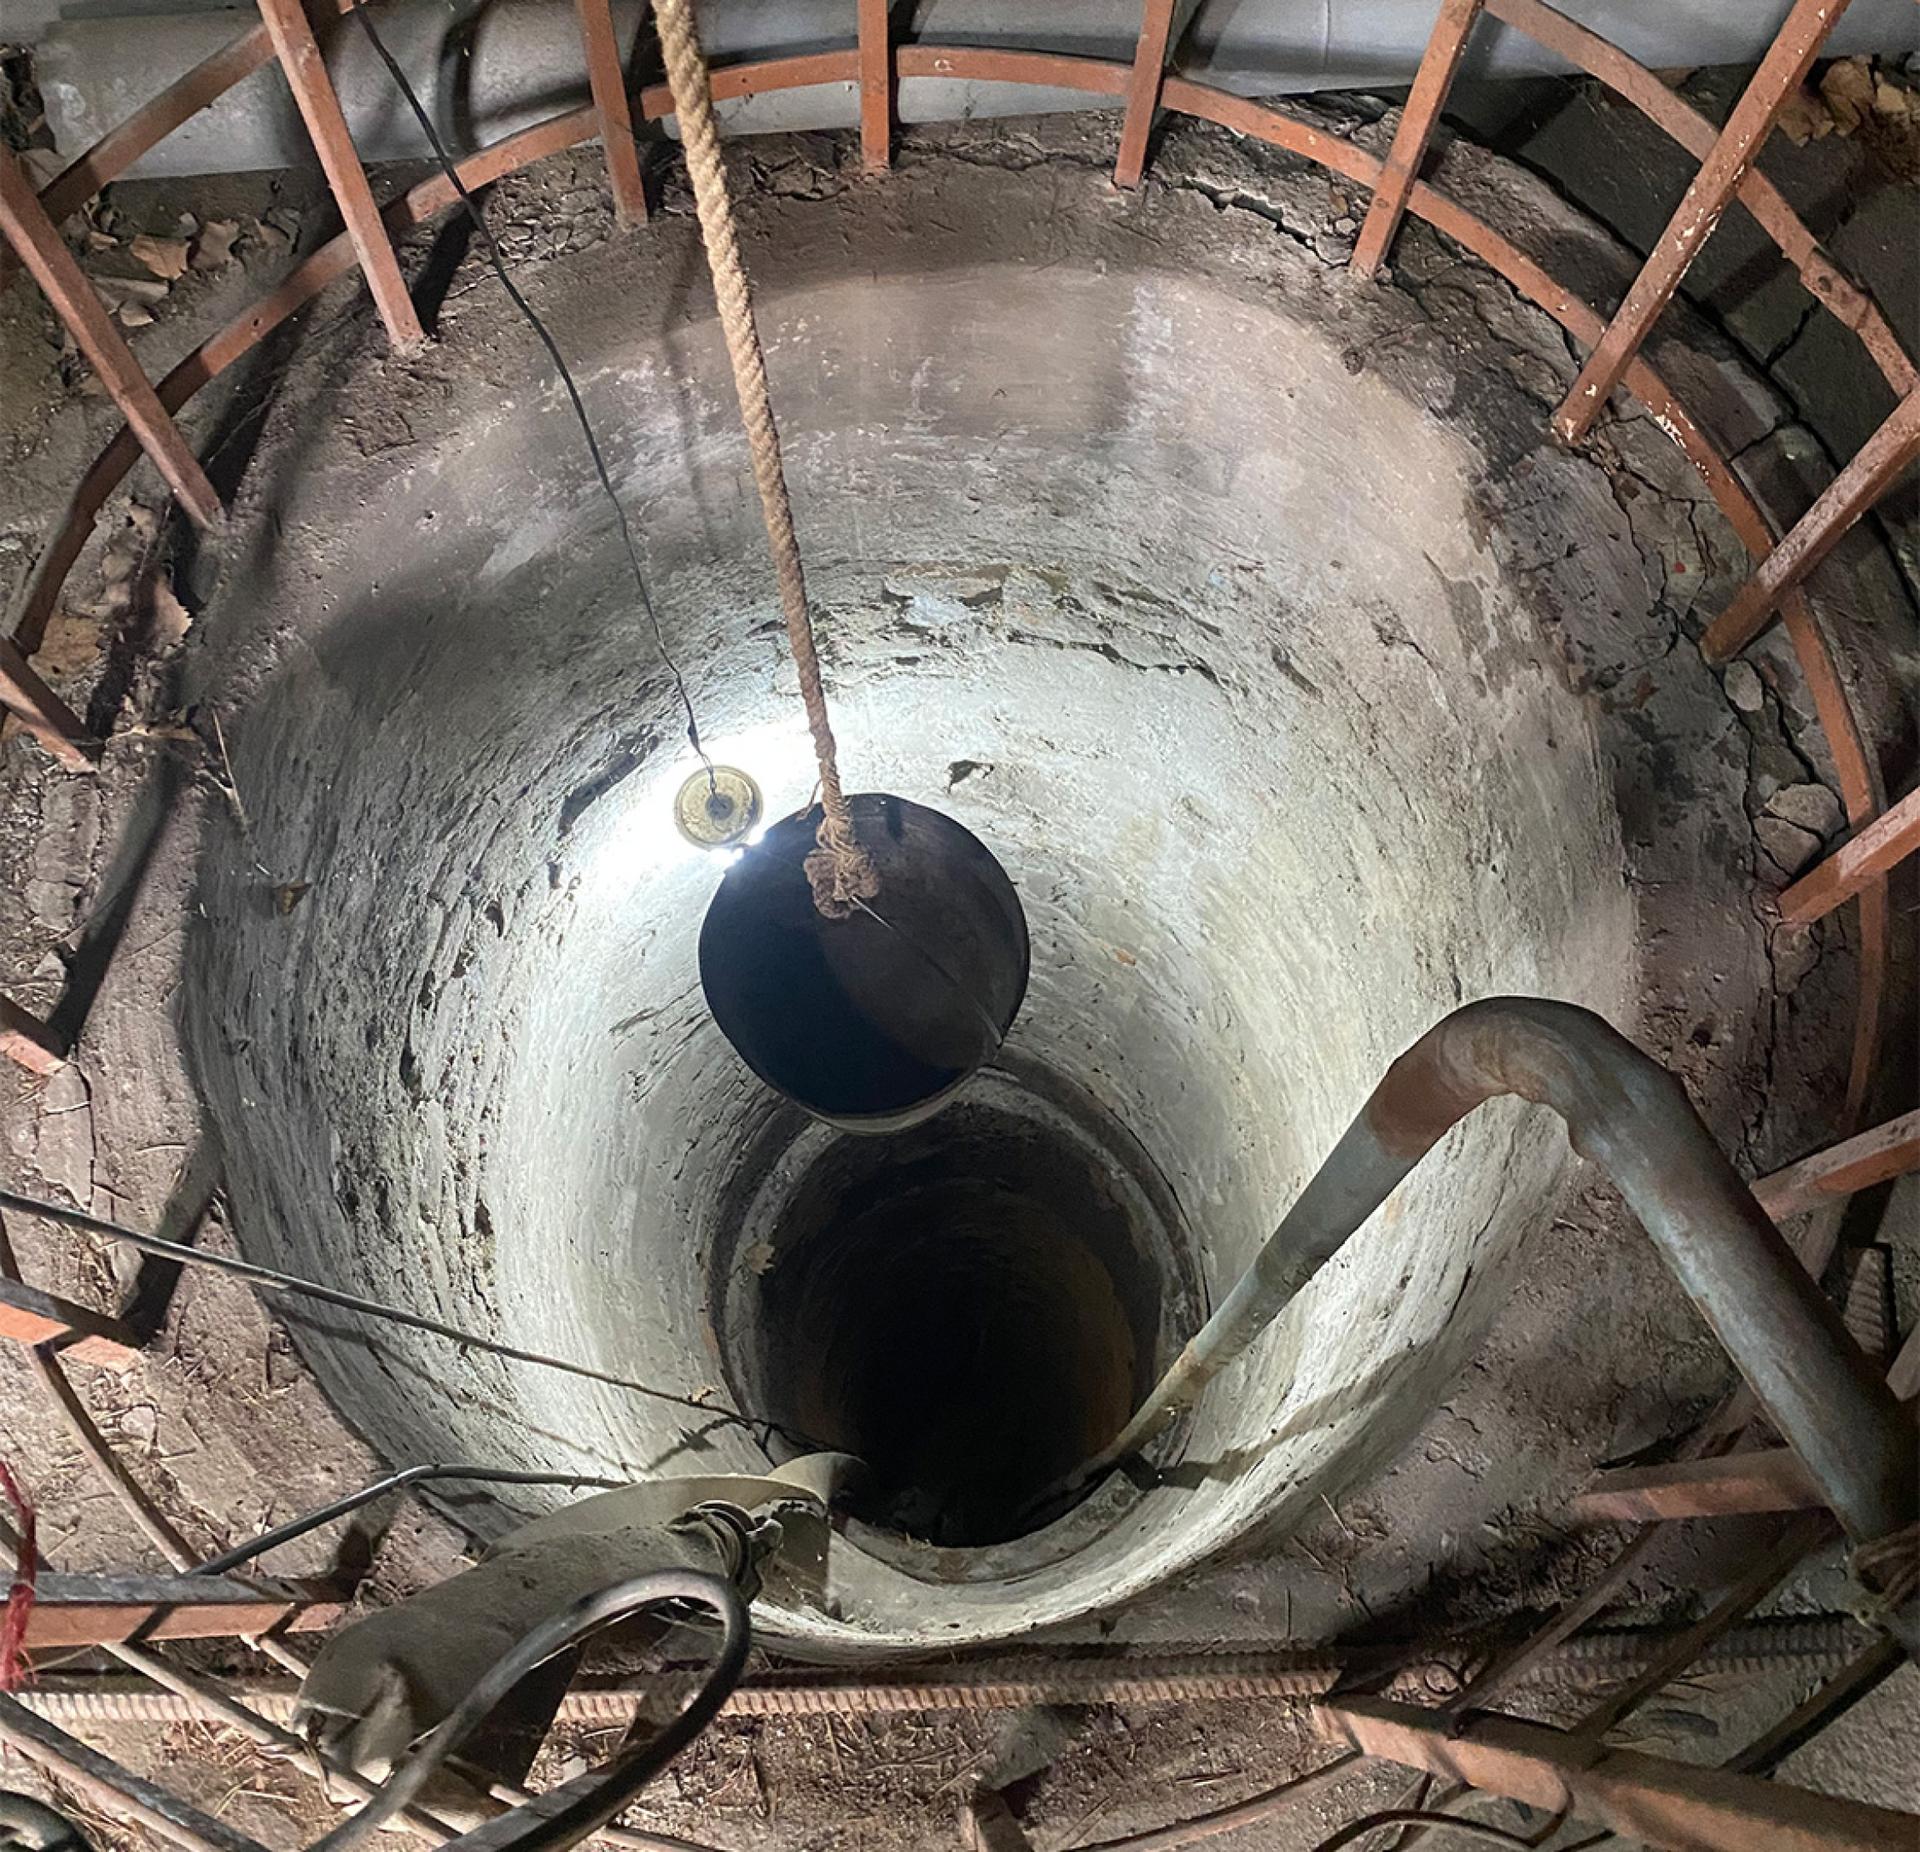 A rope plunges into a well at a Soviet-era museum in Tbilisi, Georgia.